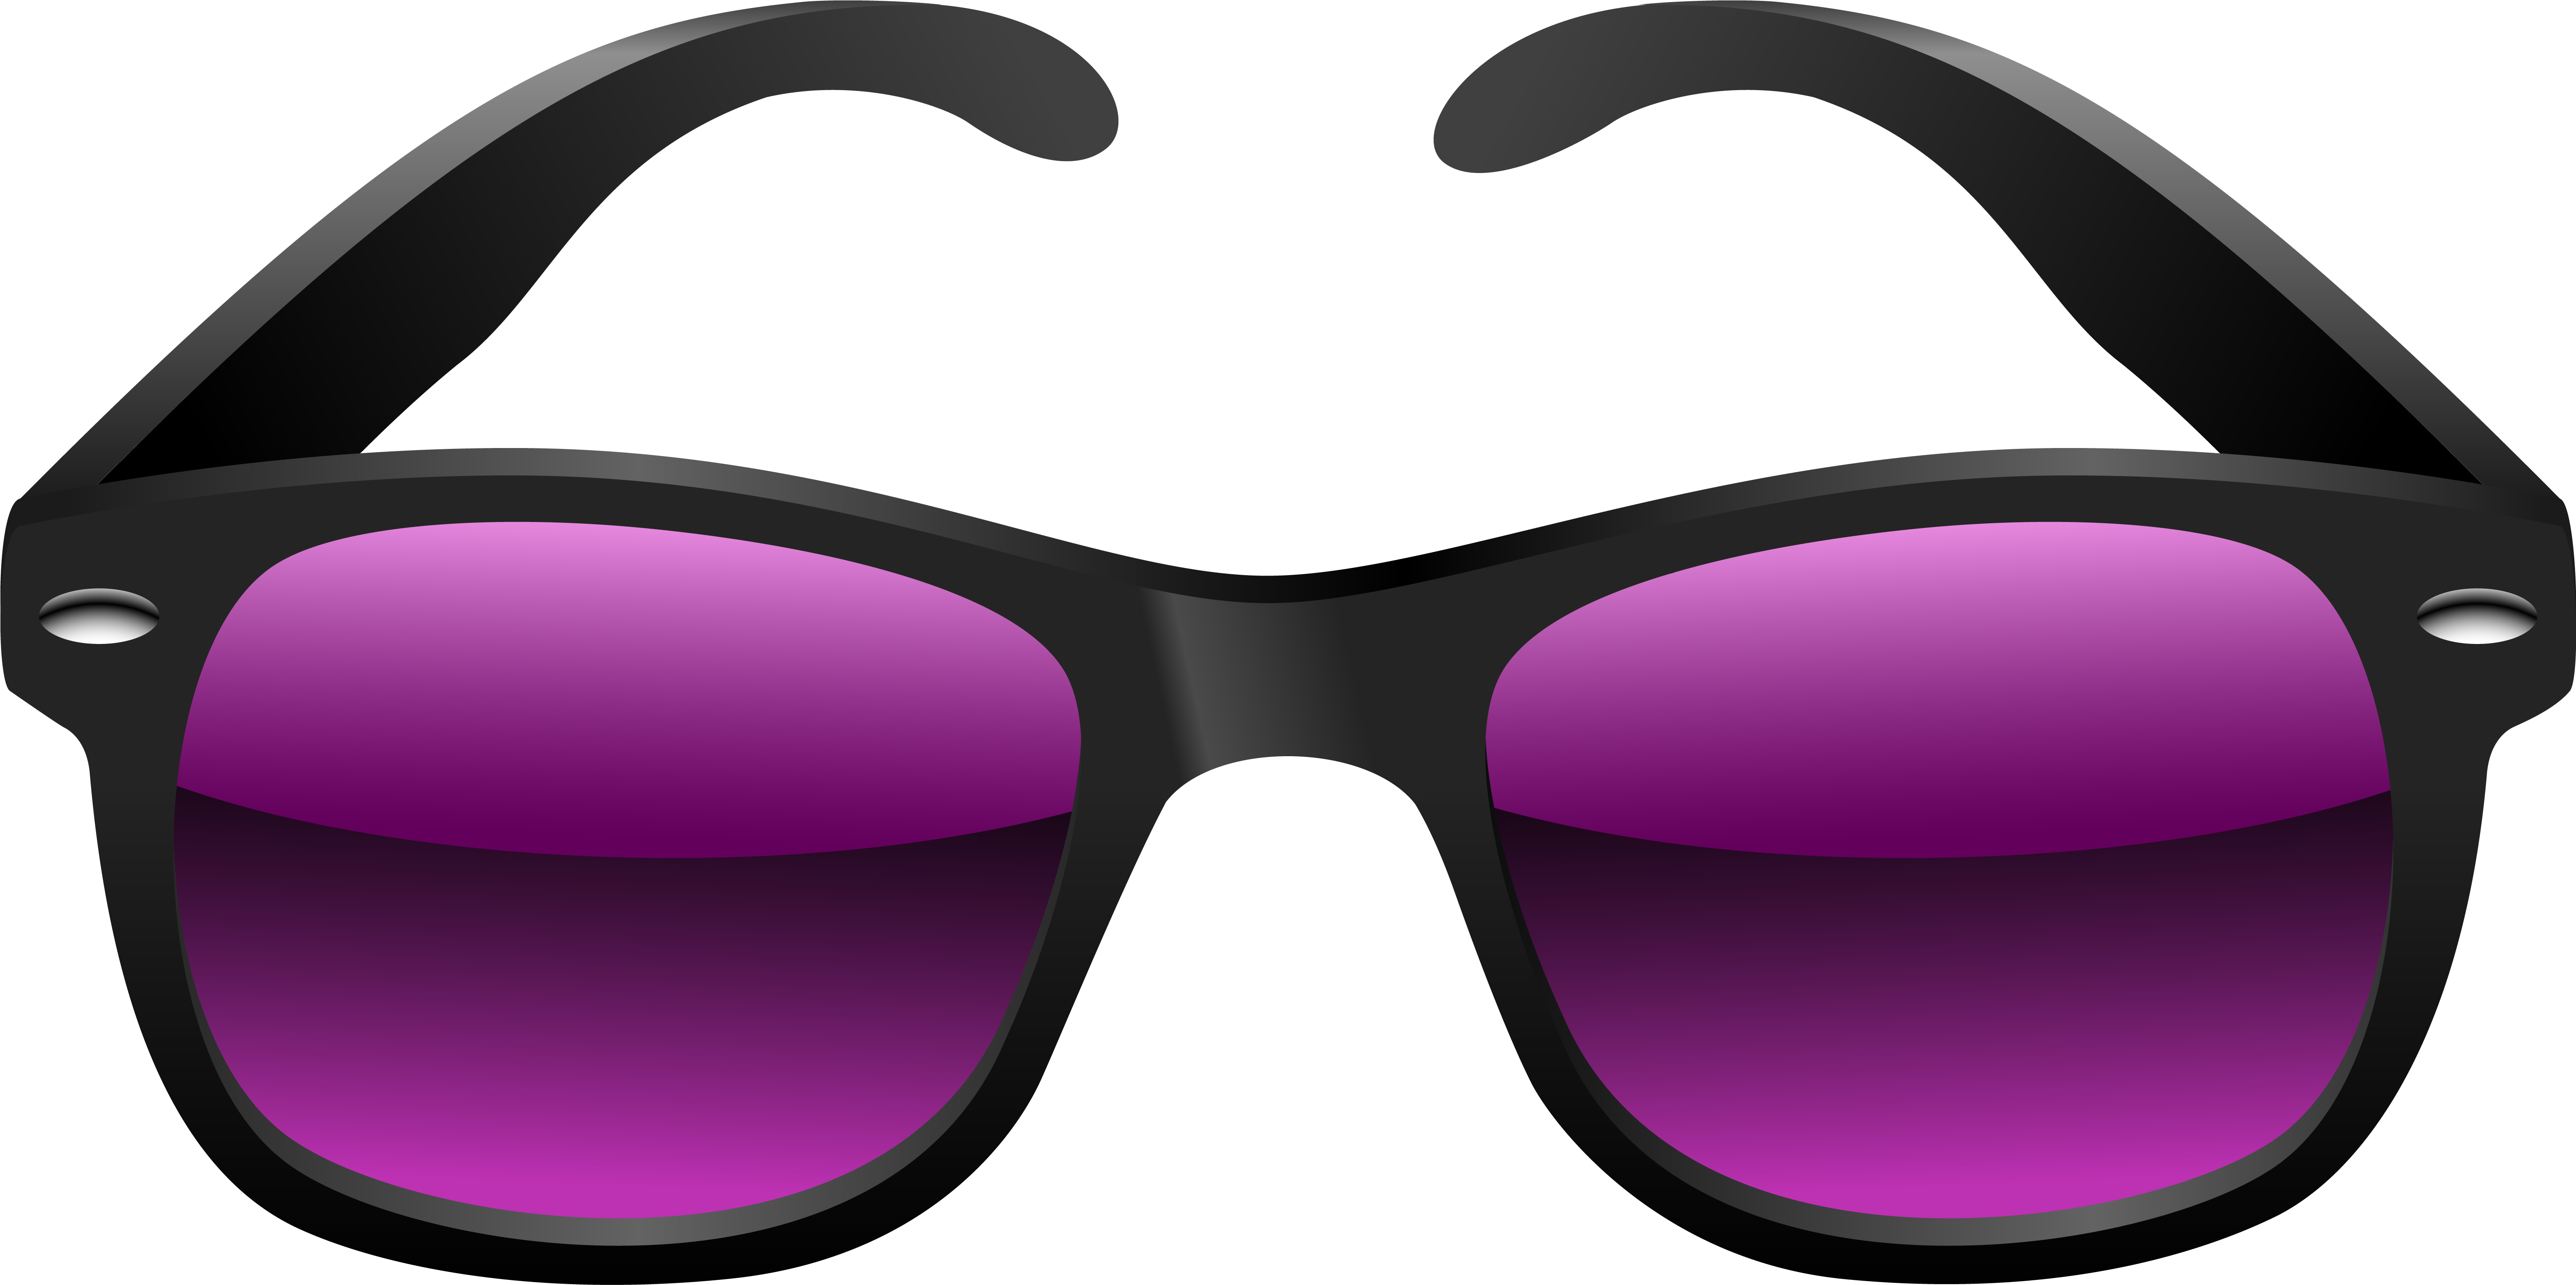 Sunglasses Png Images, Download Free Sunglasses Clipart - Kids Sunglasses  Clipart - Free Transparent PNG Download - PNGkey